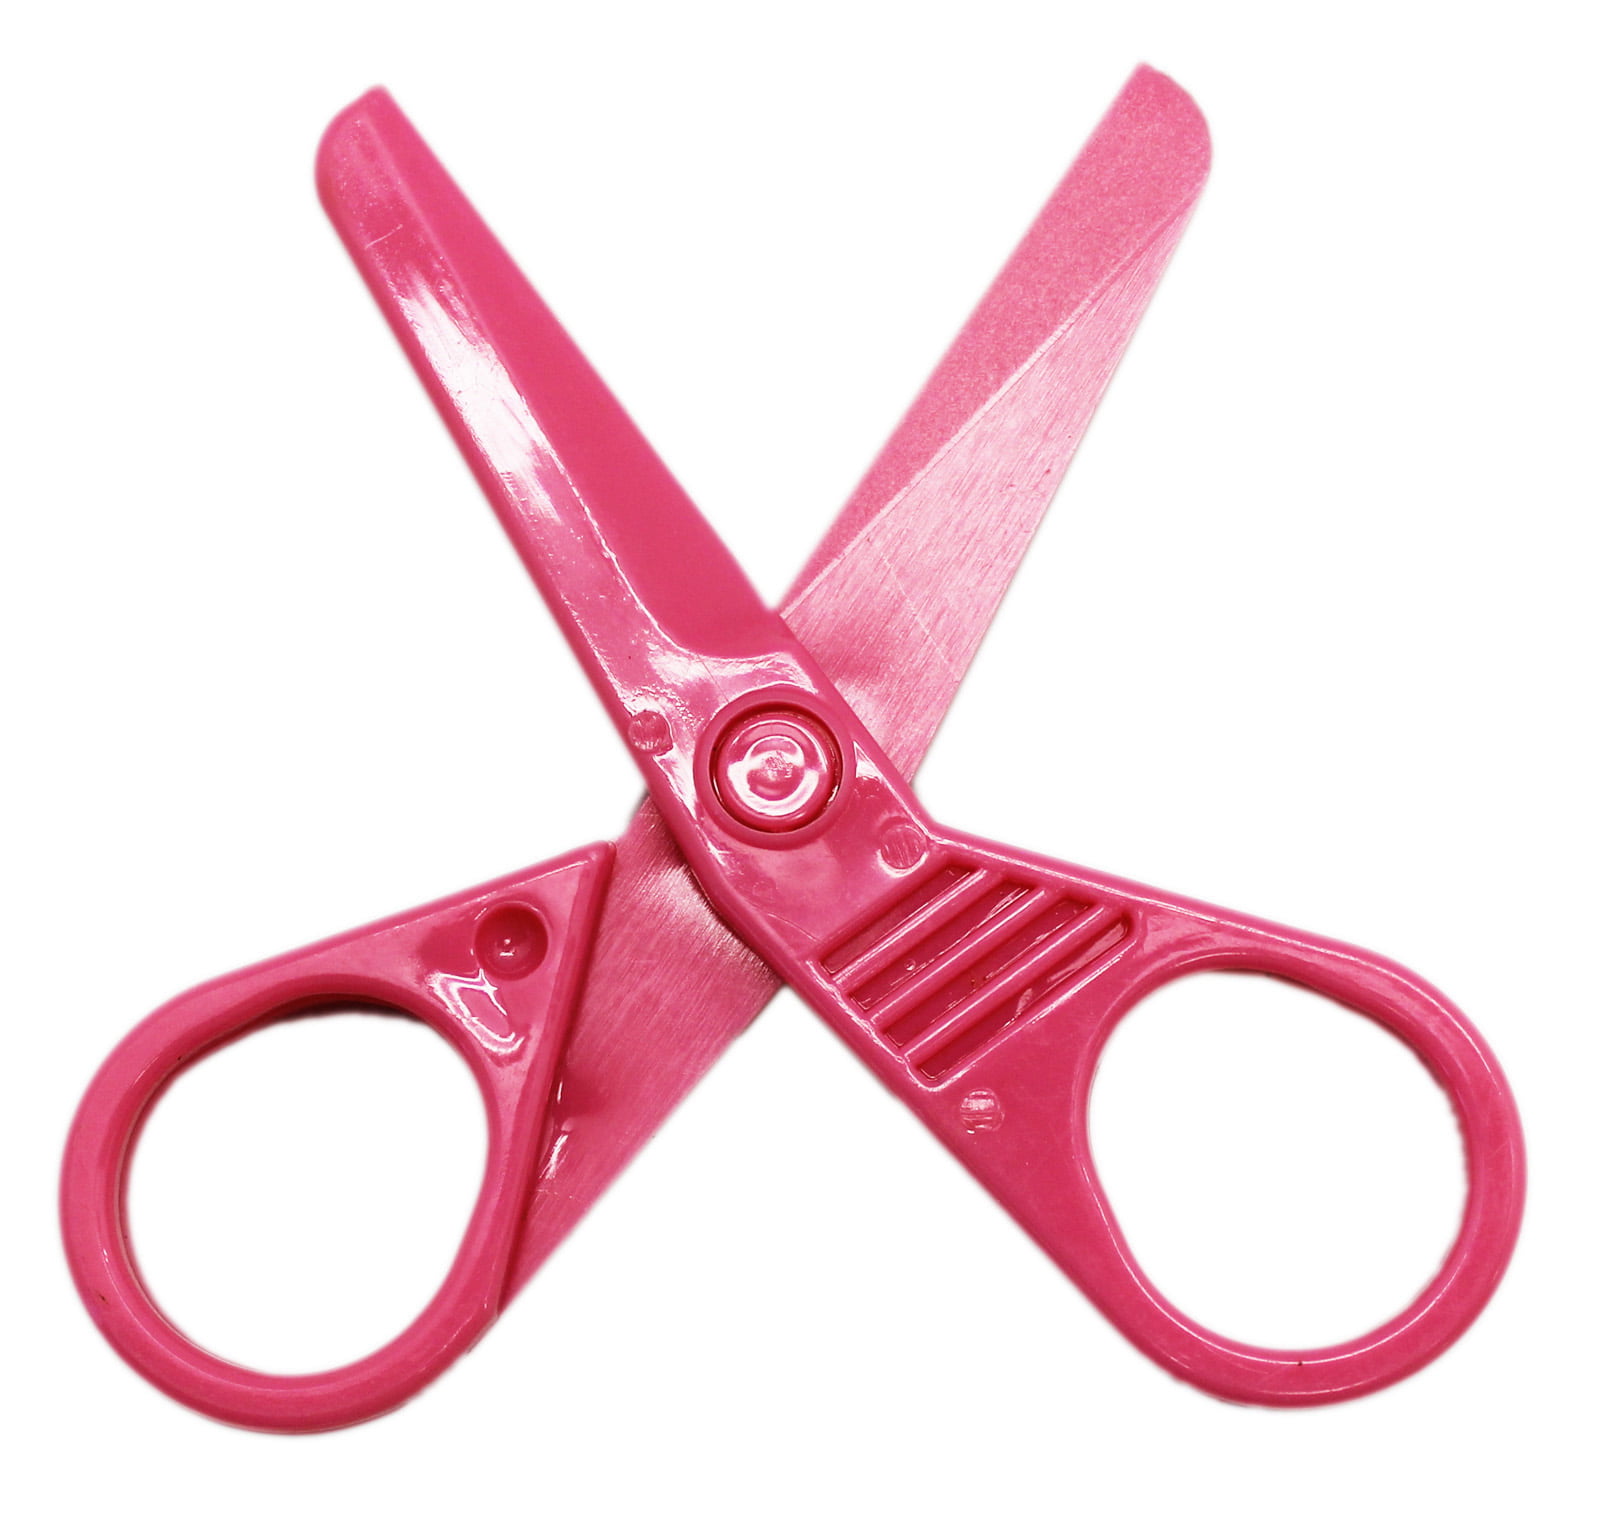 Naievear Colorful Mini Scissors Kids Safety Fingers Protective